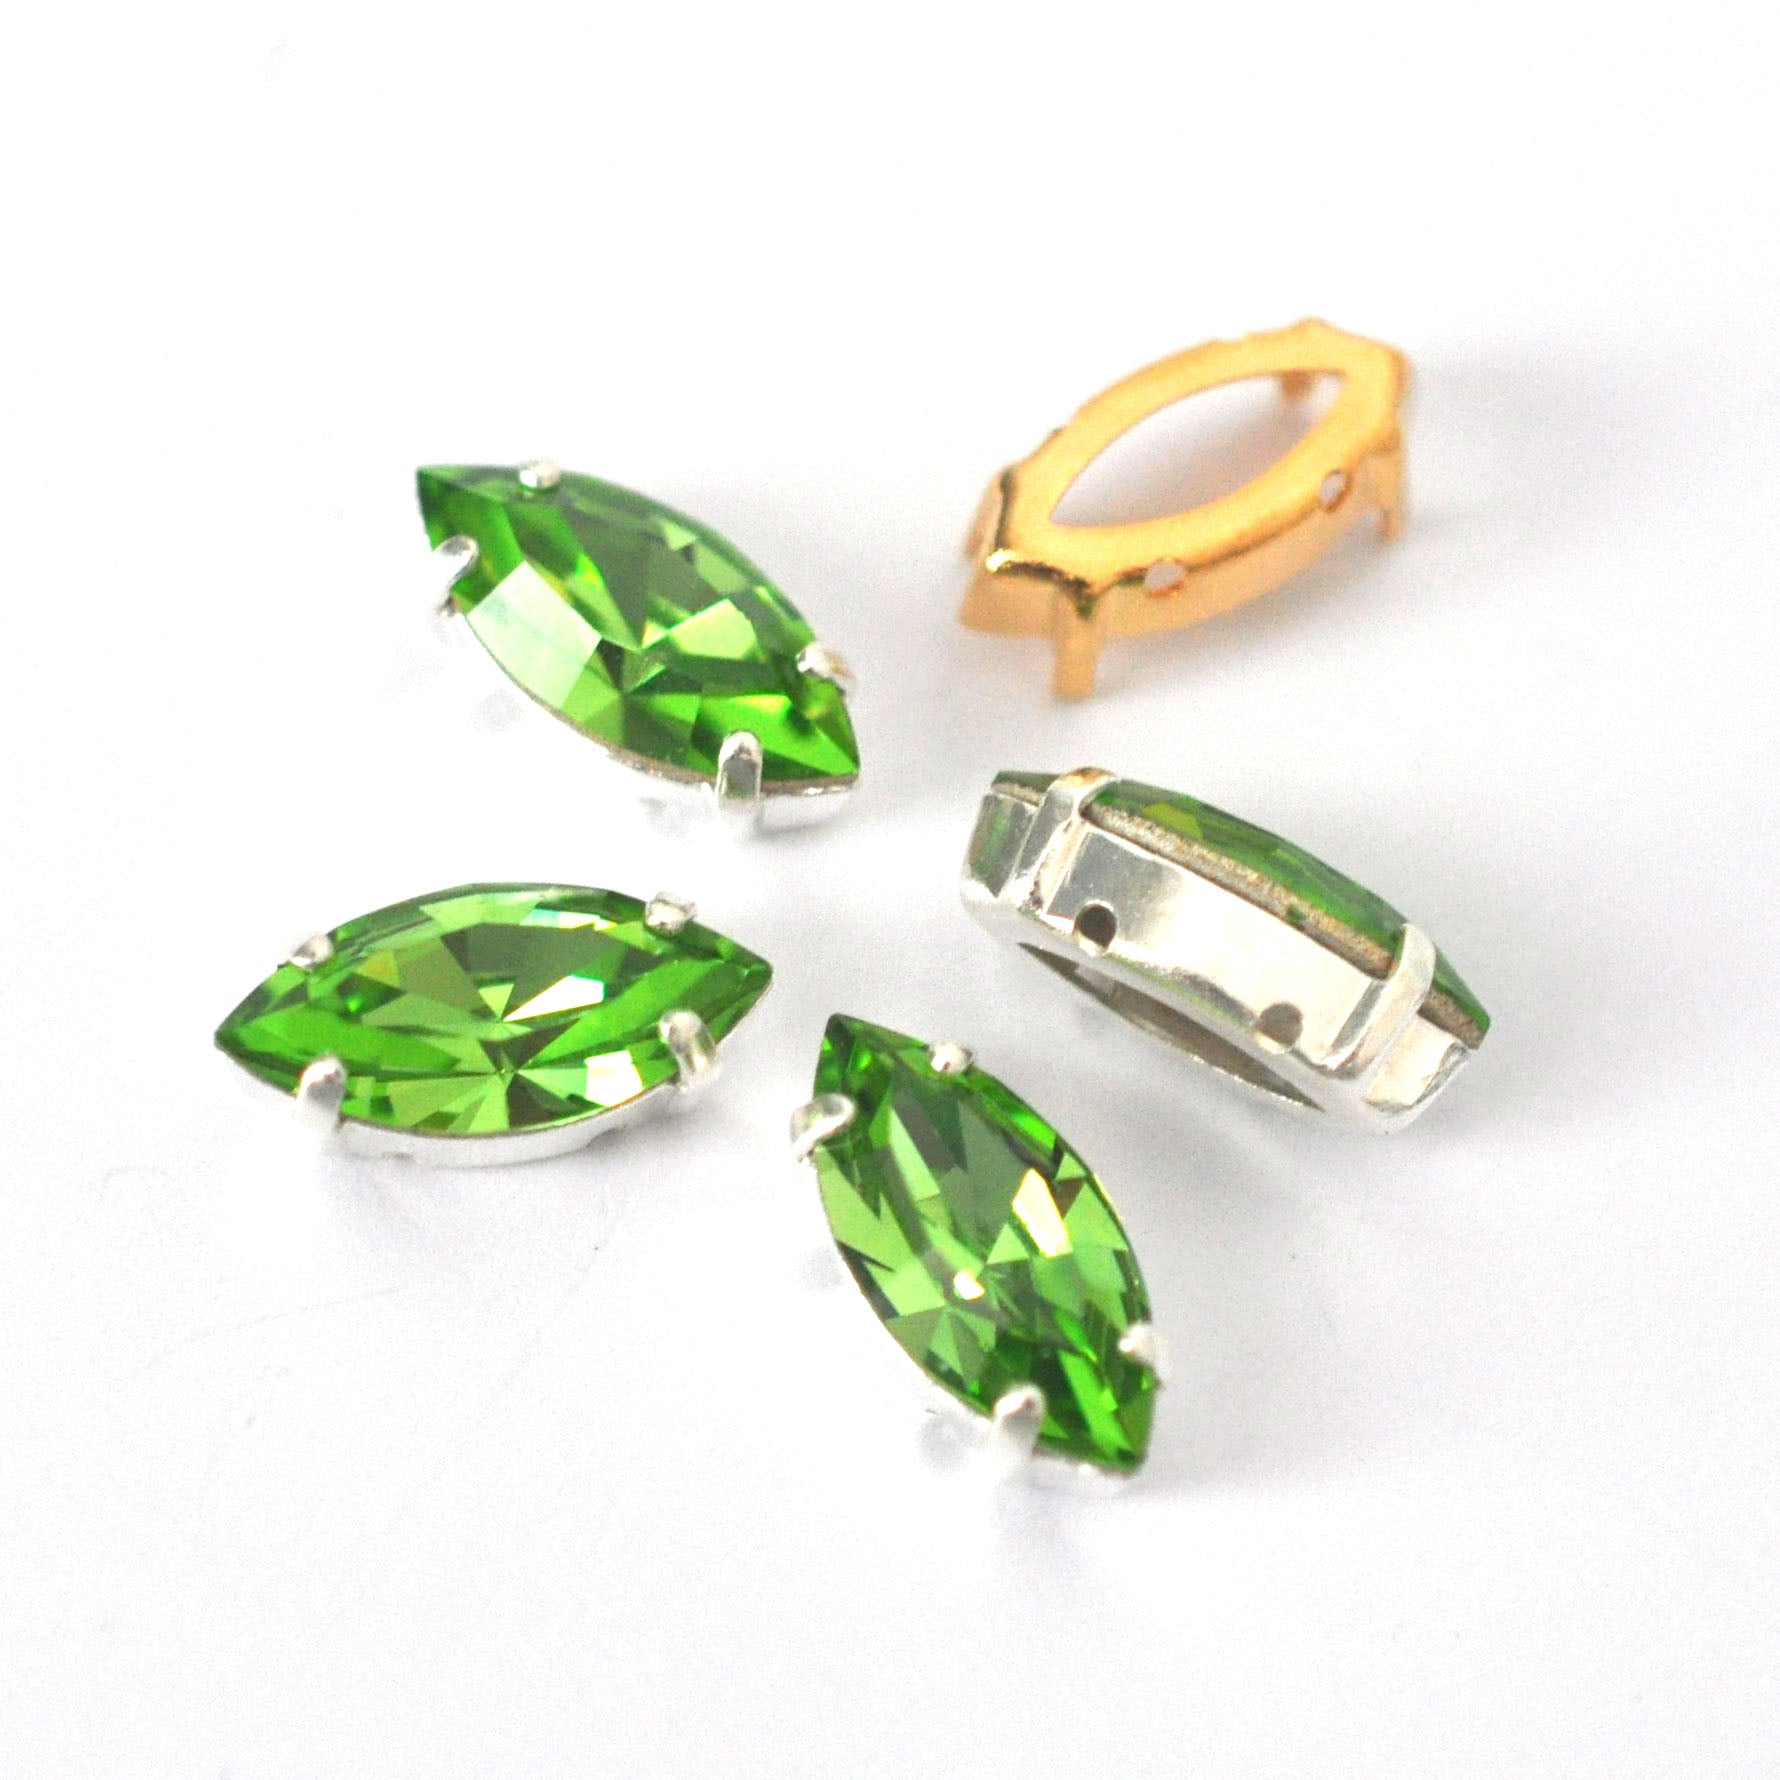 Peridot 15x7mm Navette Sew On Crystals - 4 Pieces